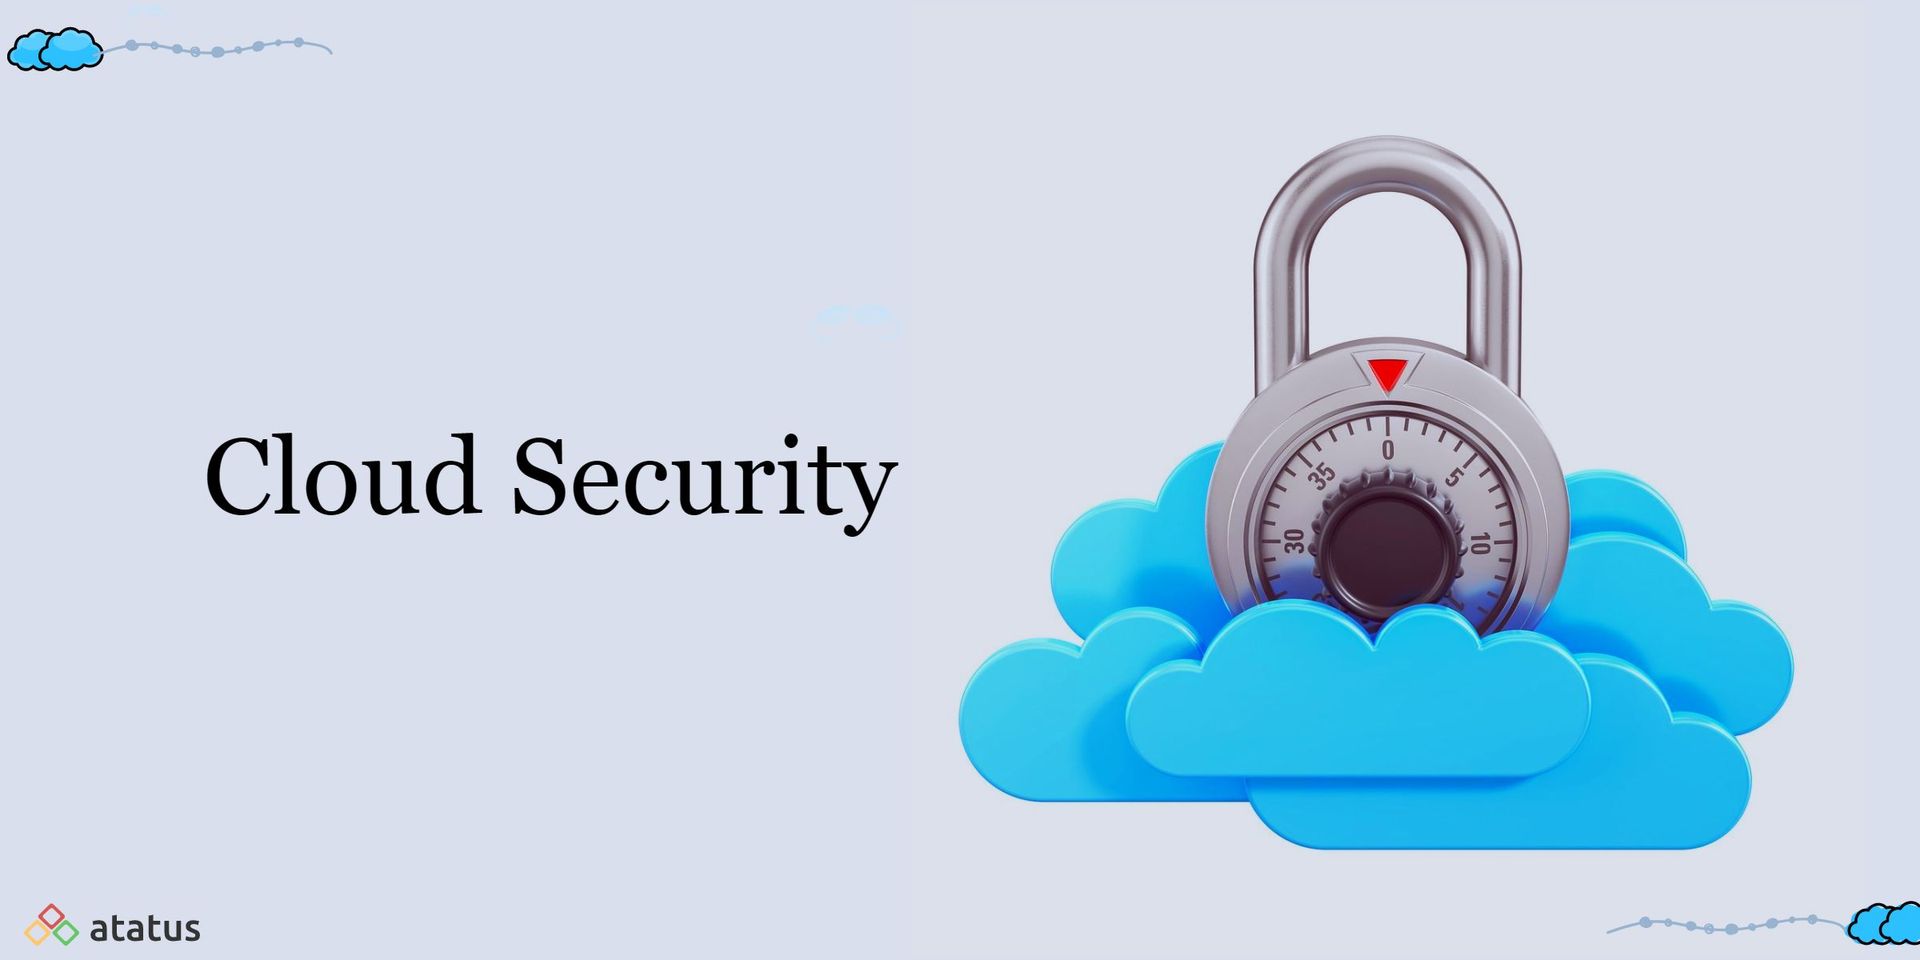  A padlock sits on top of a cloud representing cloud security measures for data protection.